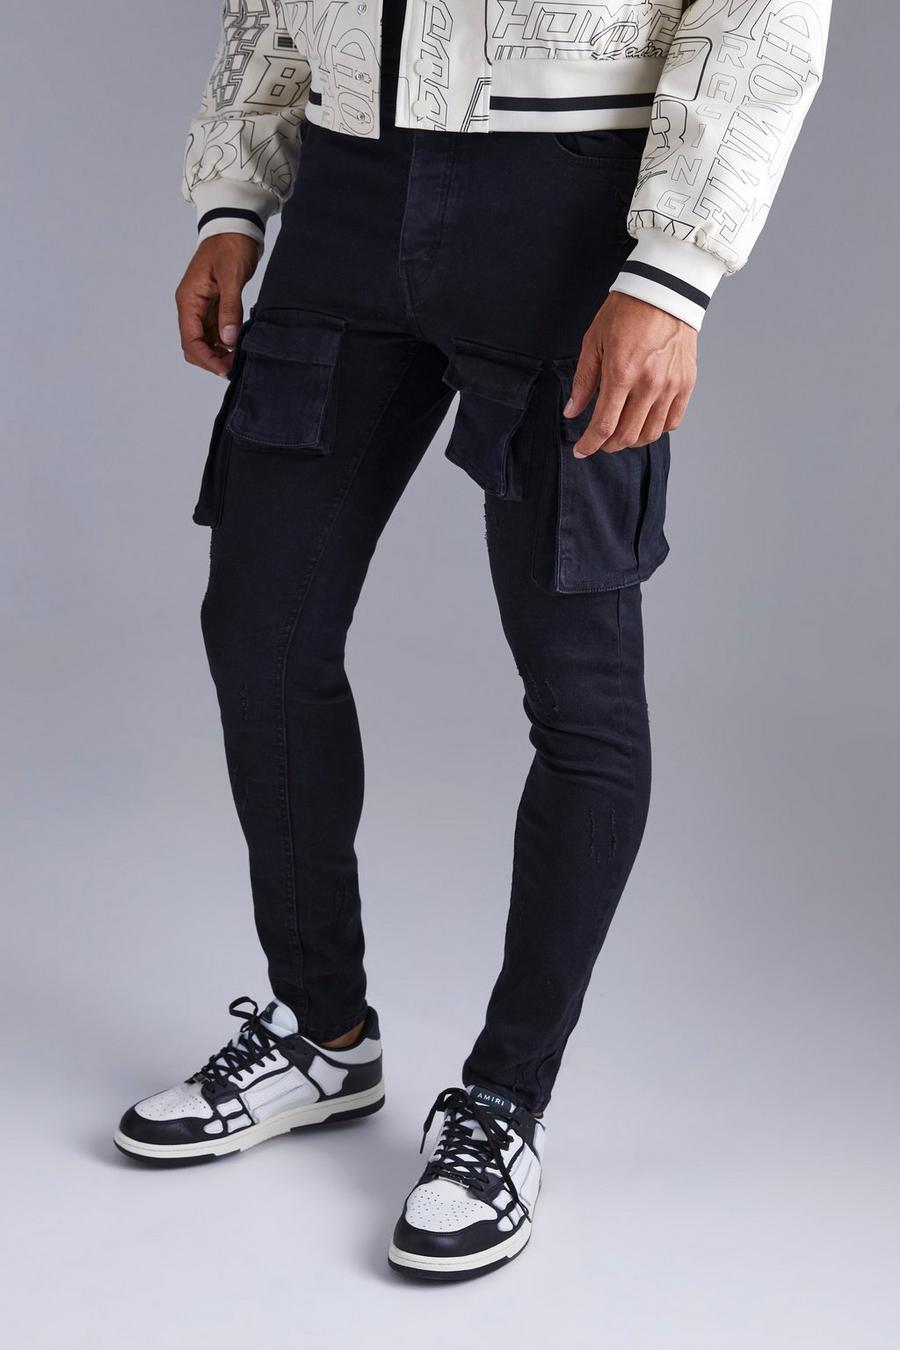 Jeans Cargo Skinny Fit in Stretch, Black negro